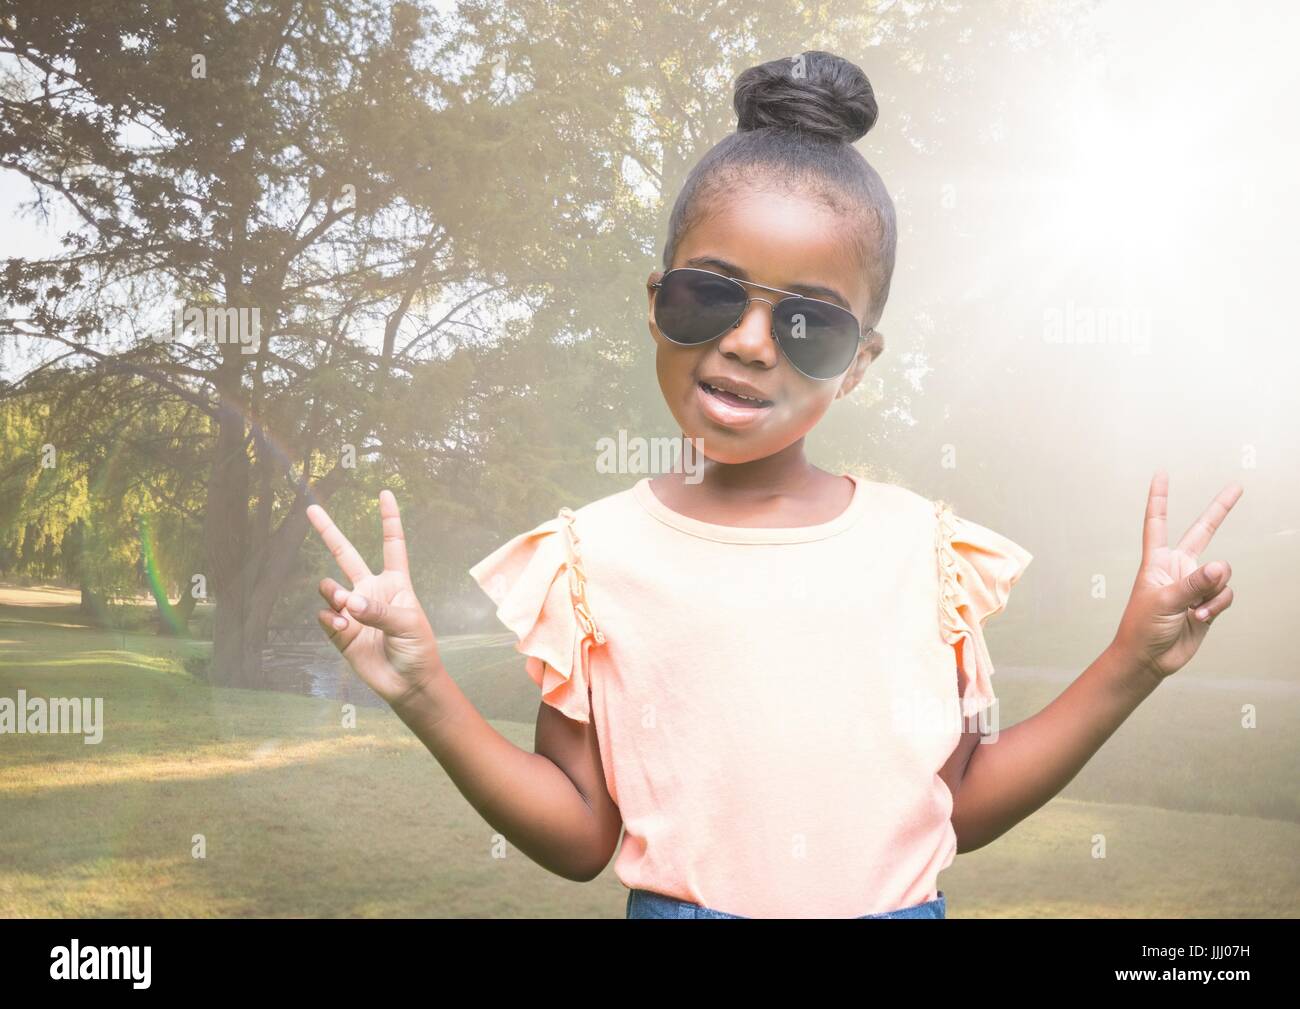 Girl in sunglasses making peace signs against blurry park with flare Stock Photo